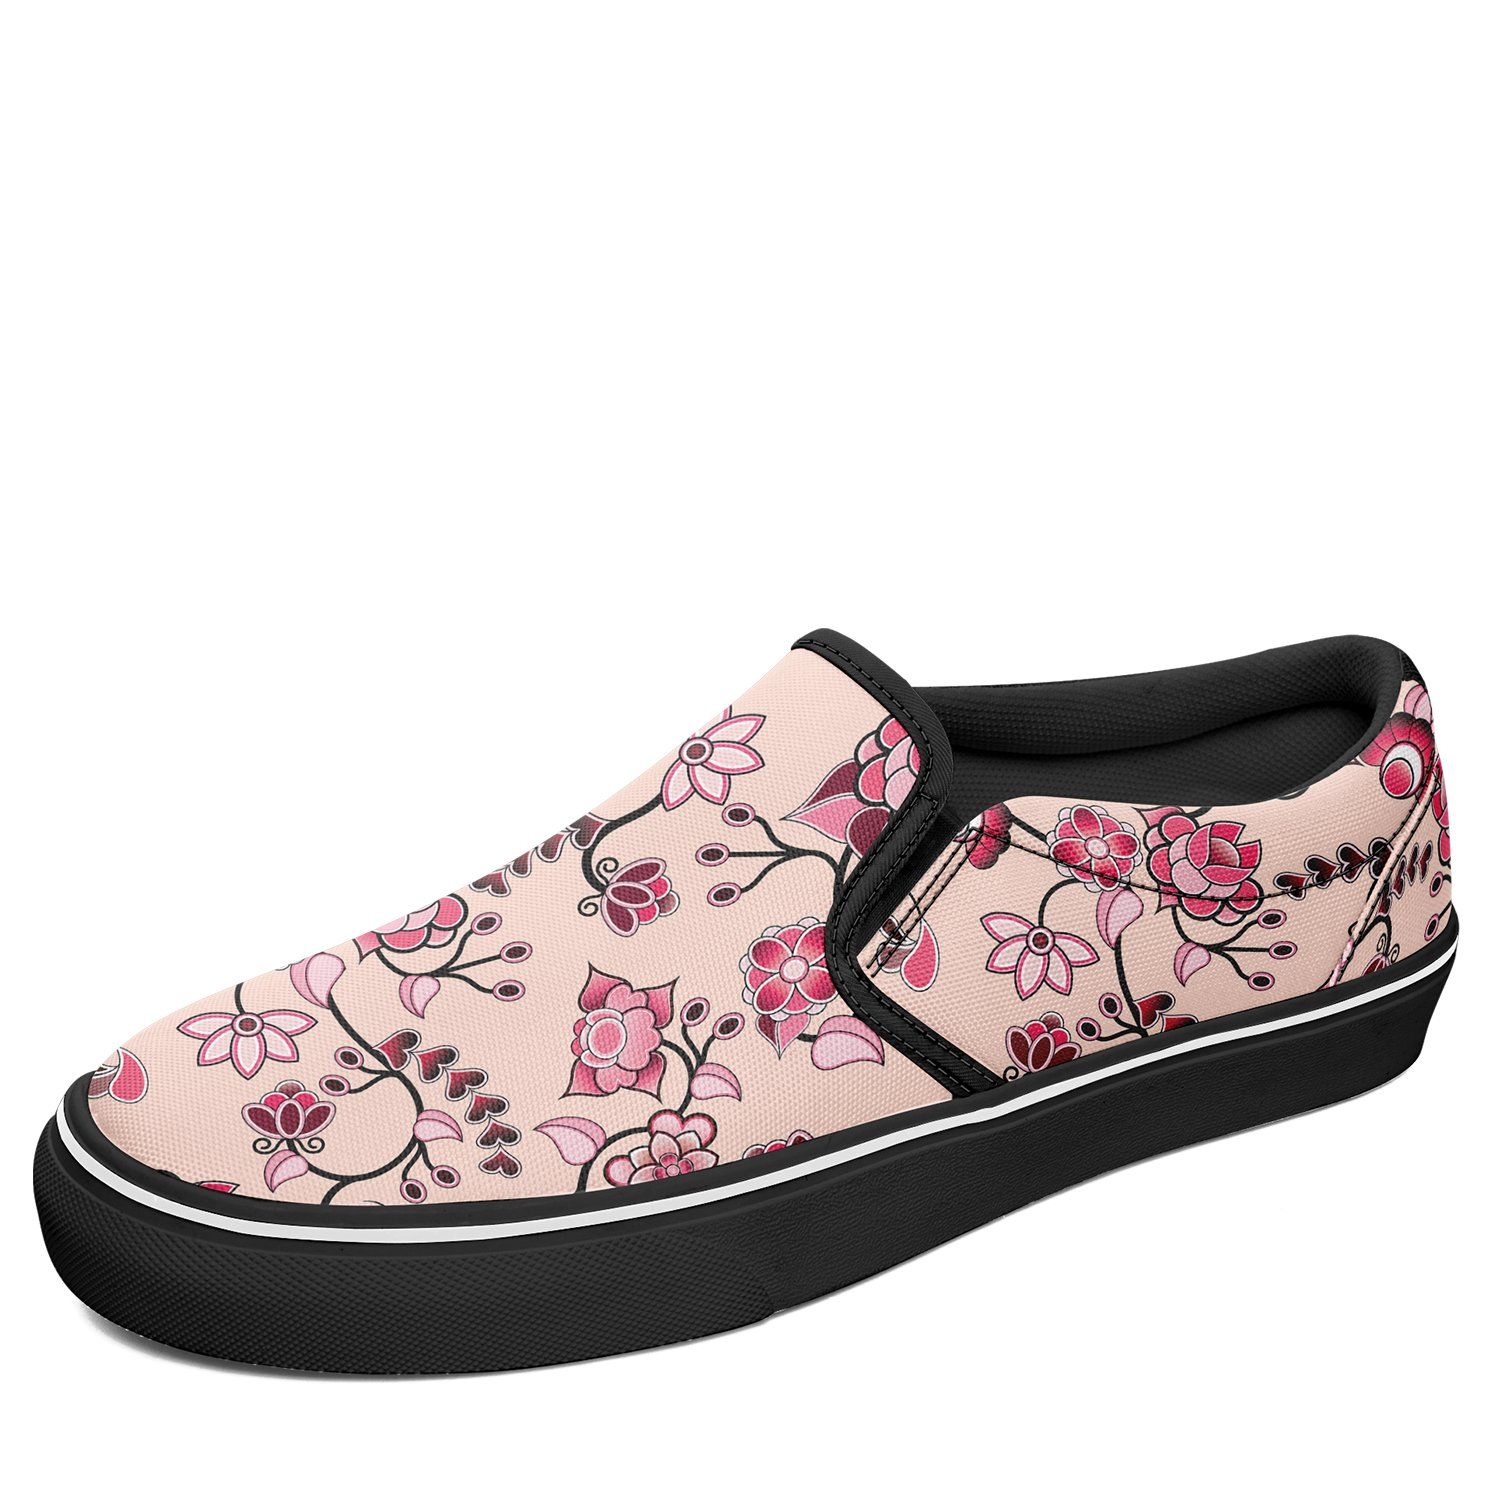 Floral Amour Otoyimm Canvas Slip On Shoes otoyimm Herman US Youth 1 / EUR 32 Black Sole 